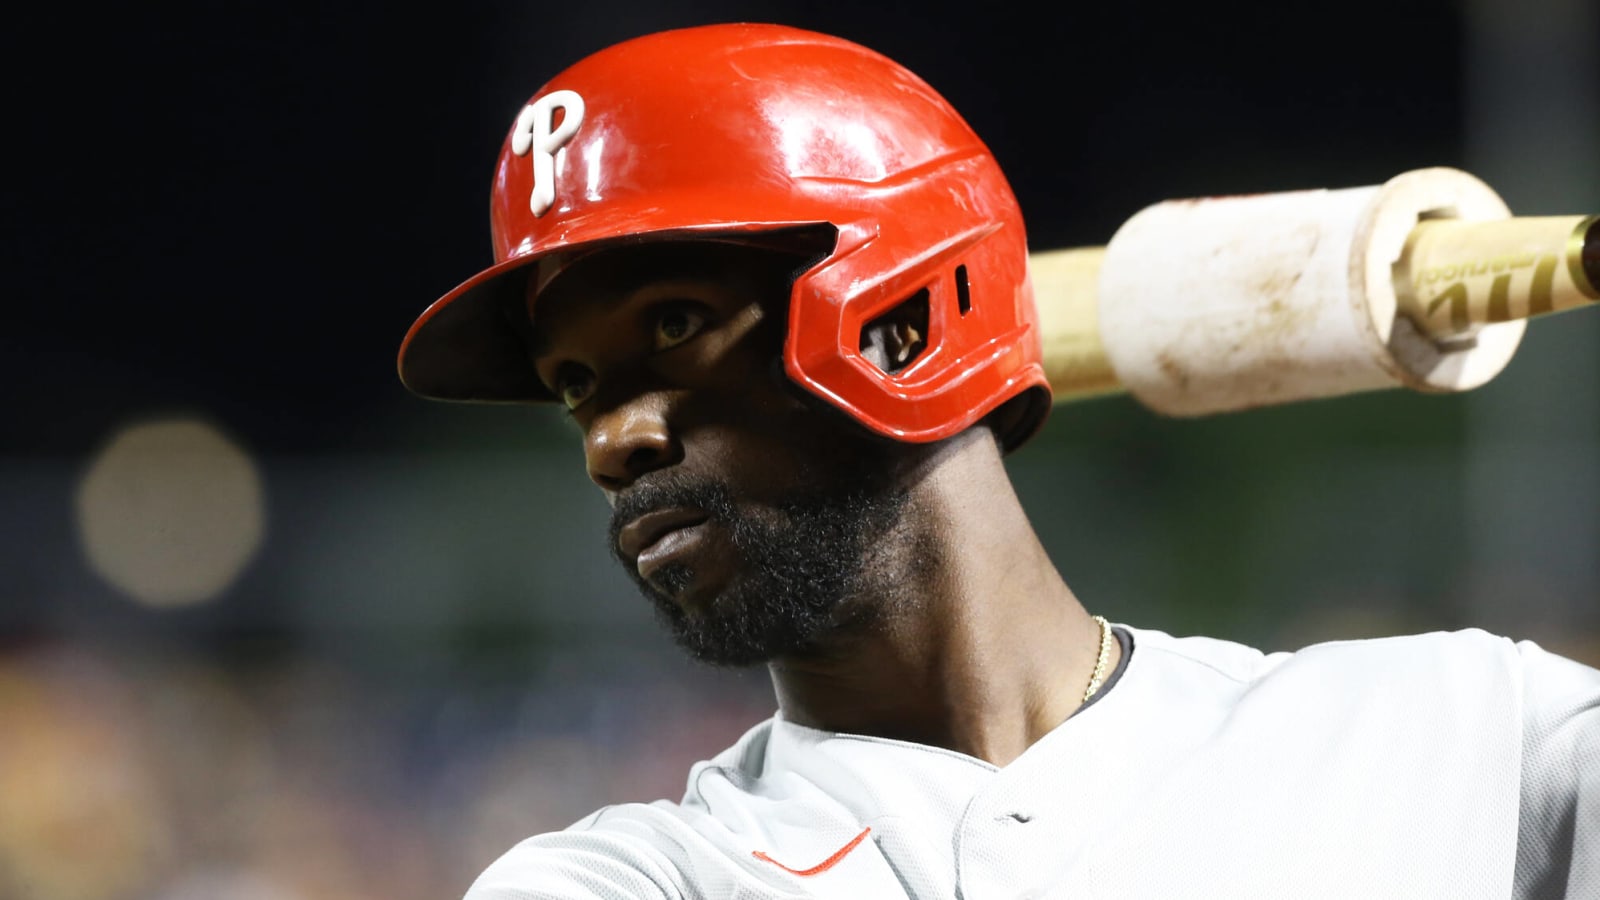 Report: Former NL MVP Andrew McCutchen set to join Brewers